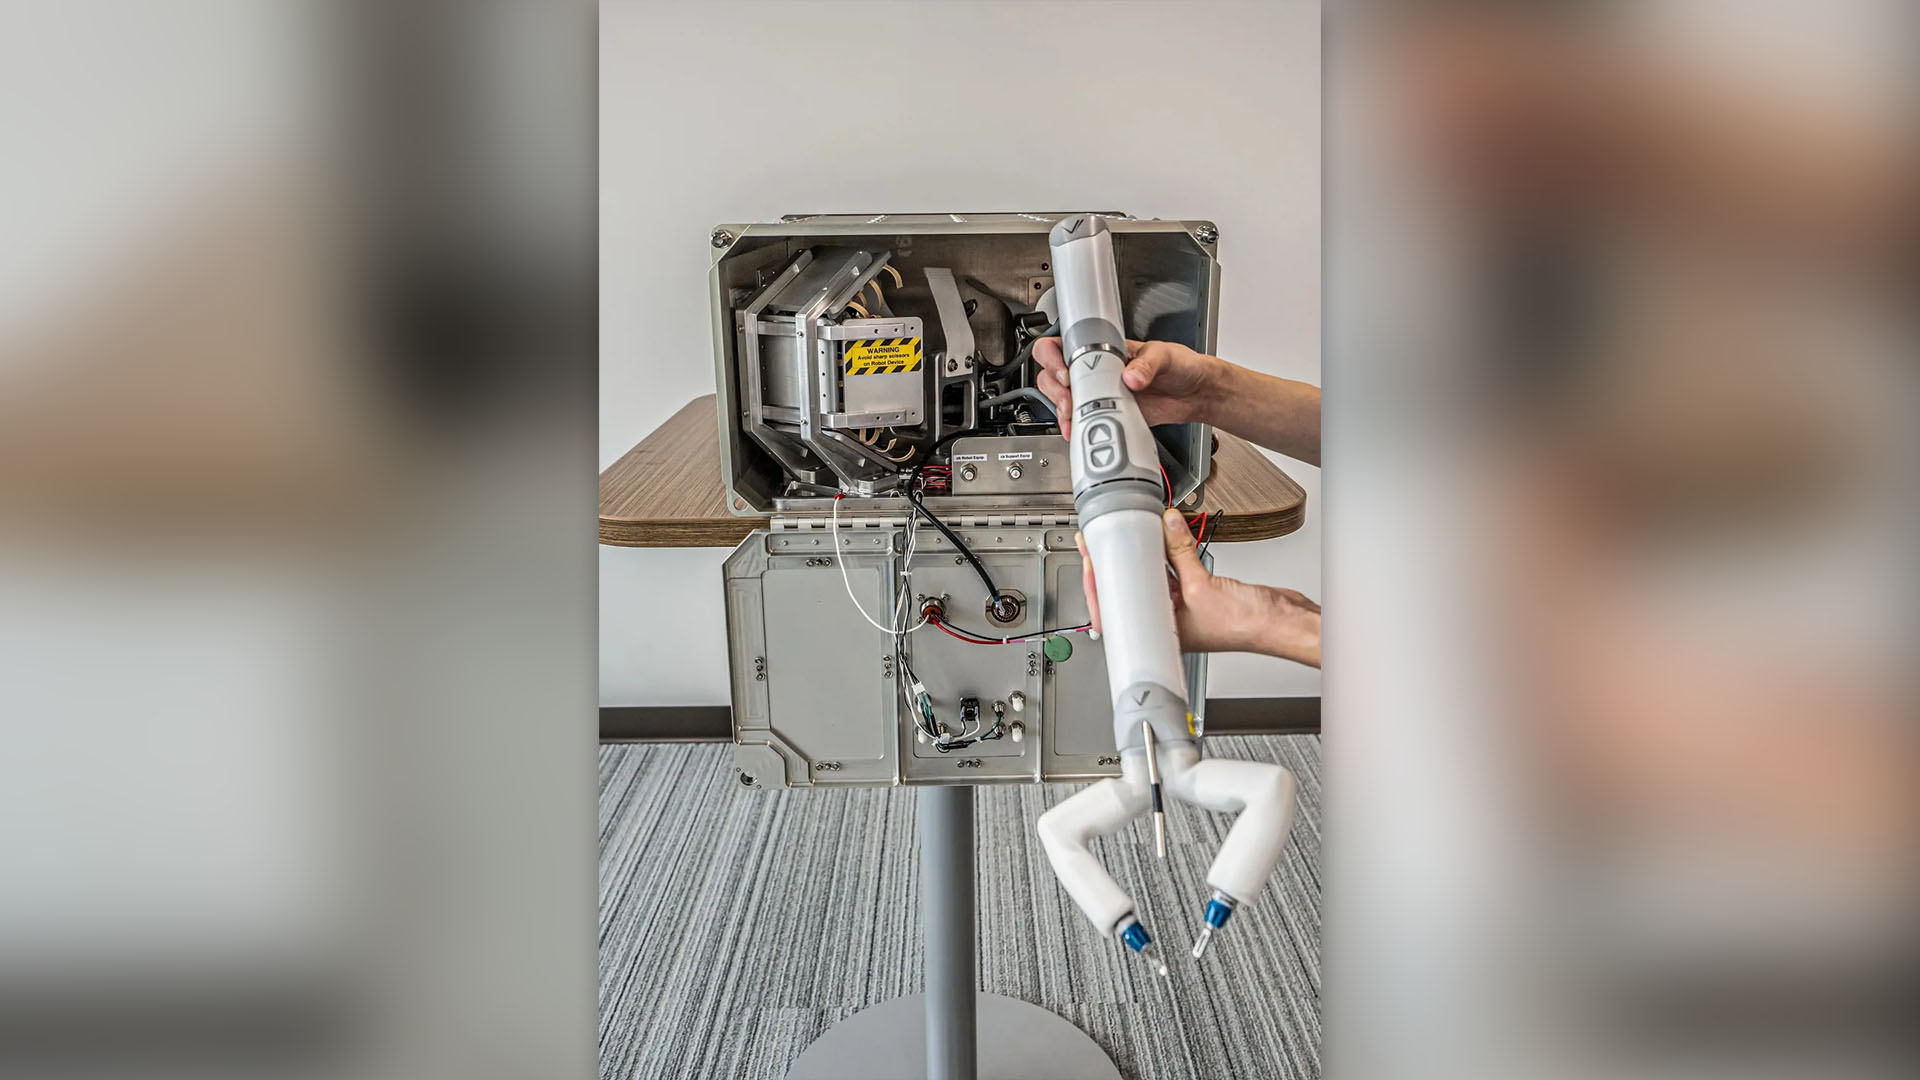 The robotic surgery device is shown outside of its investigation locker. The Robotic Surgery Tech Demo will test the performance of a small robot that can be remotely controlled from Earth to perform surgical procedures. Researchers plan to compare procedures in microgravity and on Earth to evaluate the effects of microgravity and time delays between space and ground.